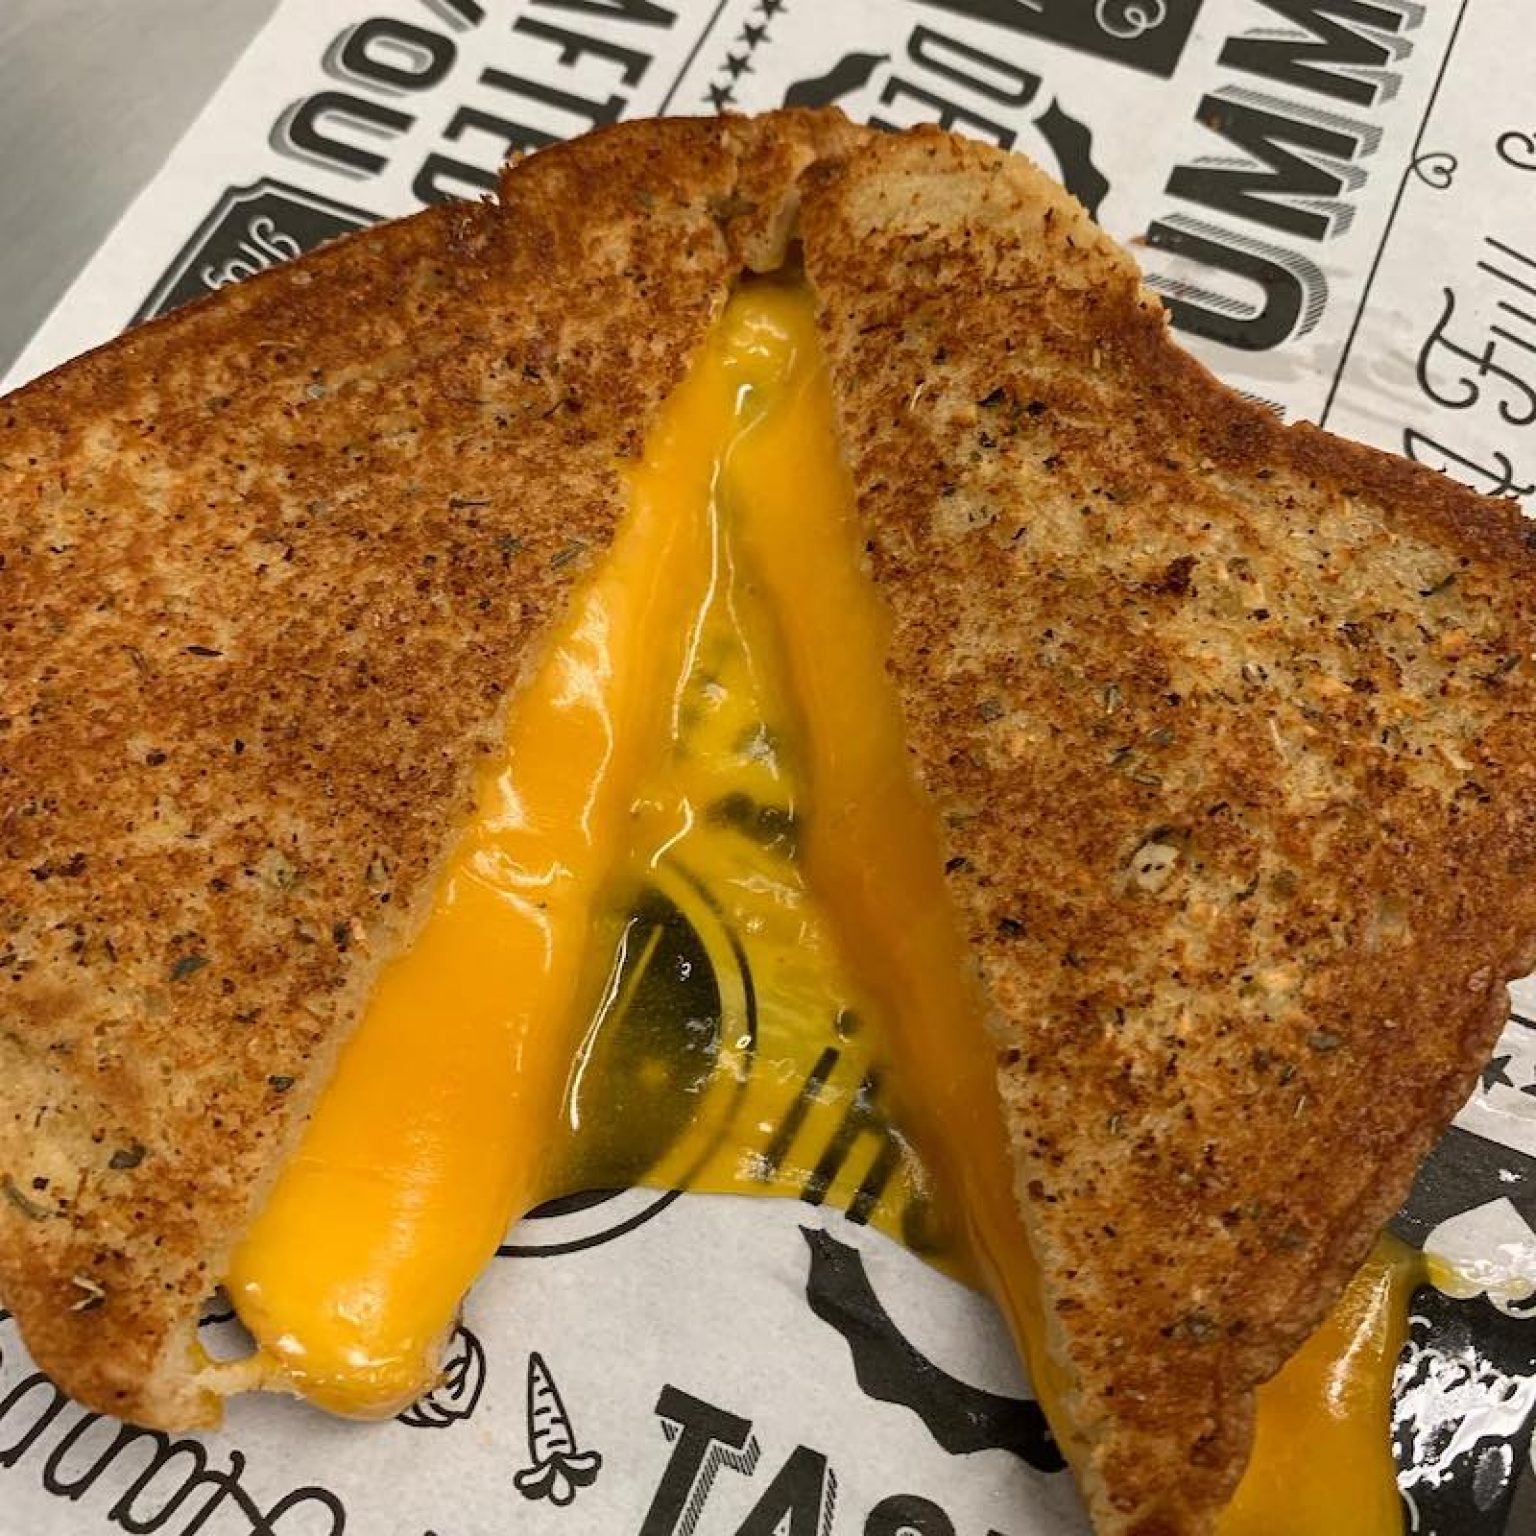 New Grilled Cheese Food Truck Hits the Streets The Sway